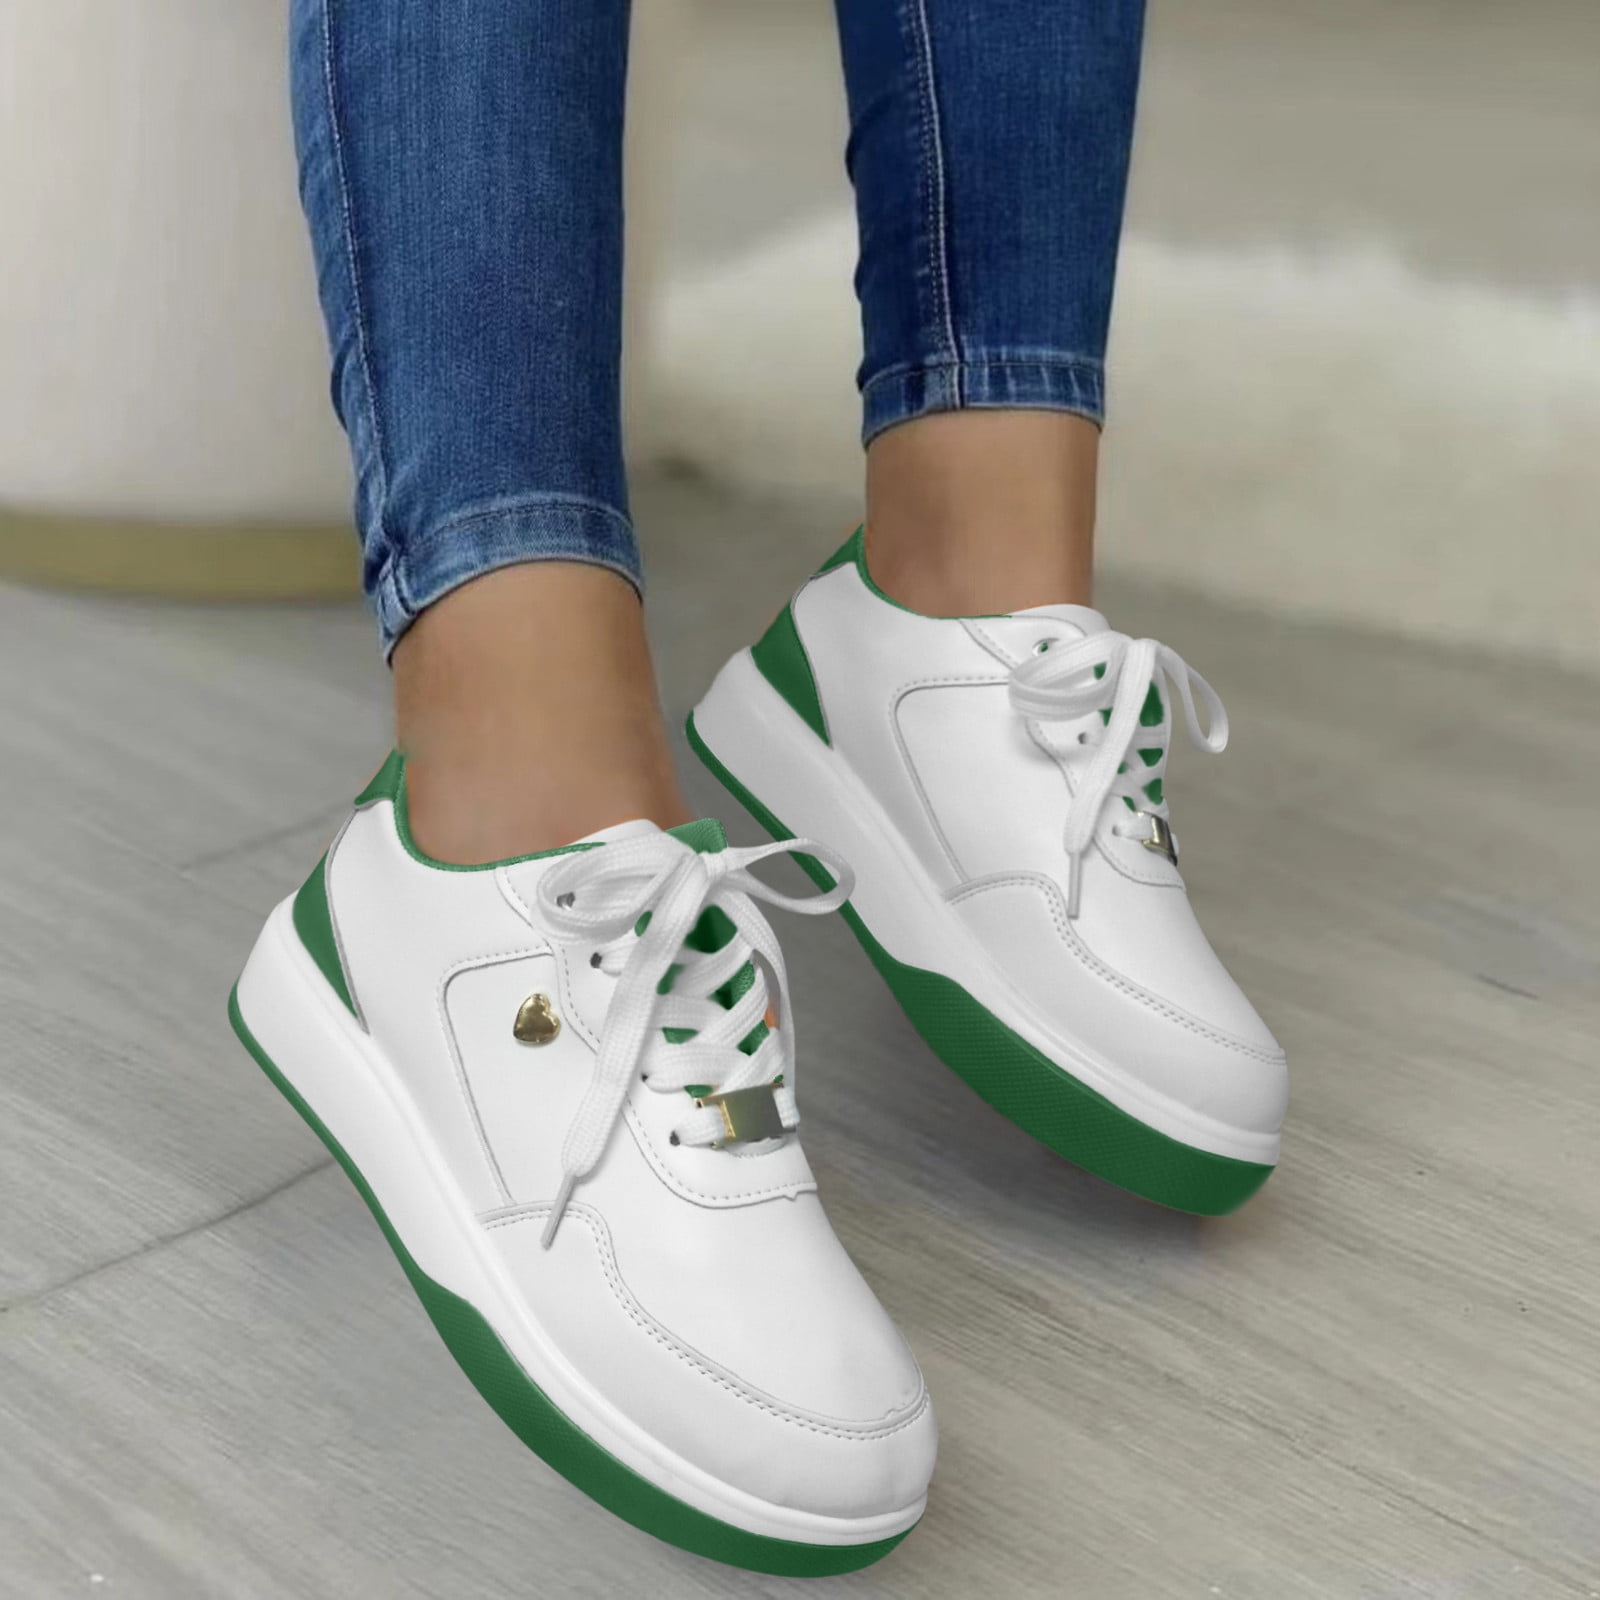 White Sneakers: How To Style White Sneakers This Fall | White sneakers  outfit, White shoes outfit, White tennis shoes outfit